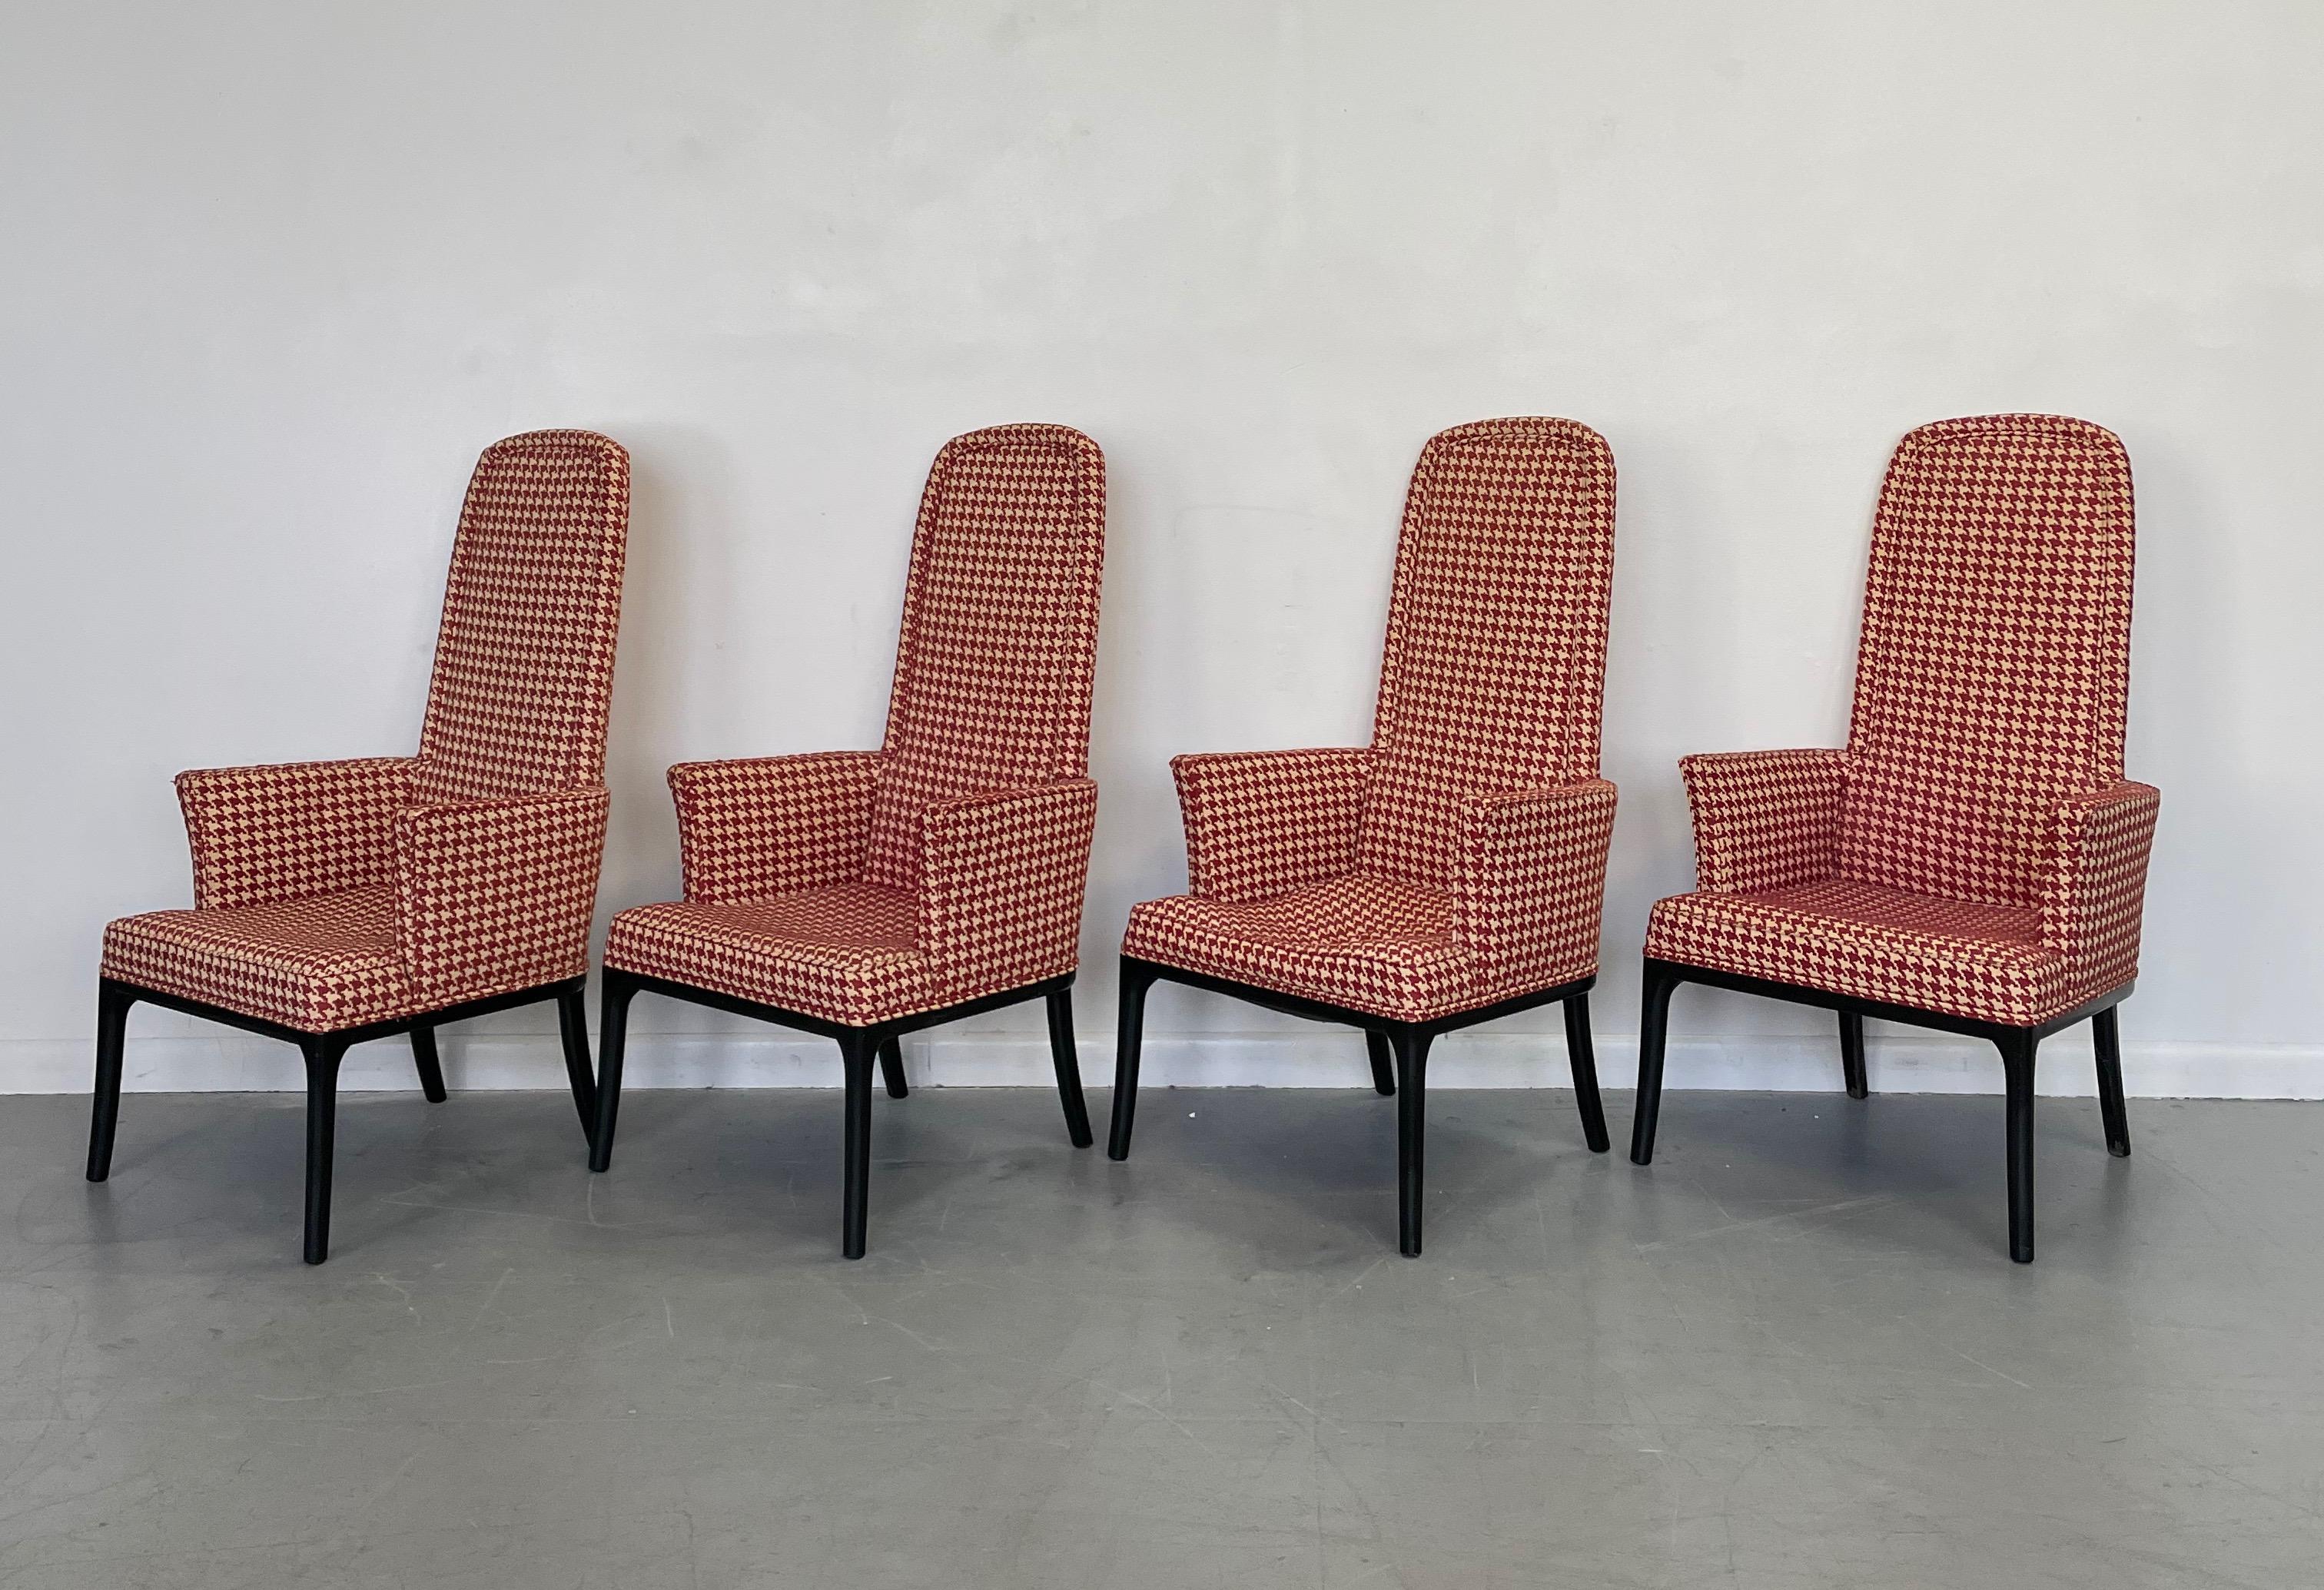 Elegant set of four high backed armchairs that can be used as dining chairs or game table chairs. Lovely design with slender lags and a high back that makes for a beautiful profile. These chairs have the original fabric and finish, both need